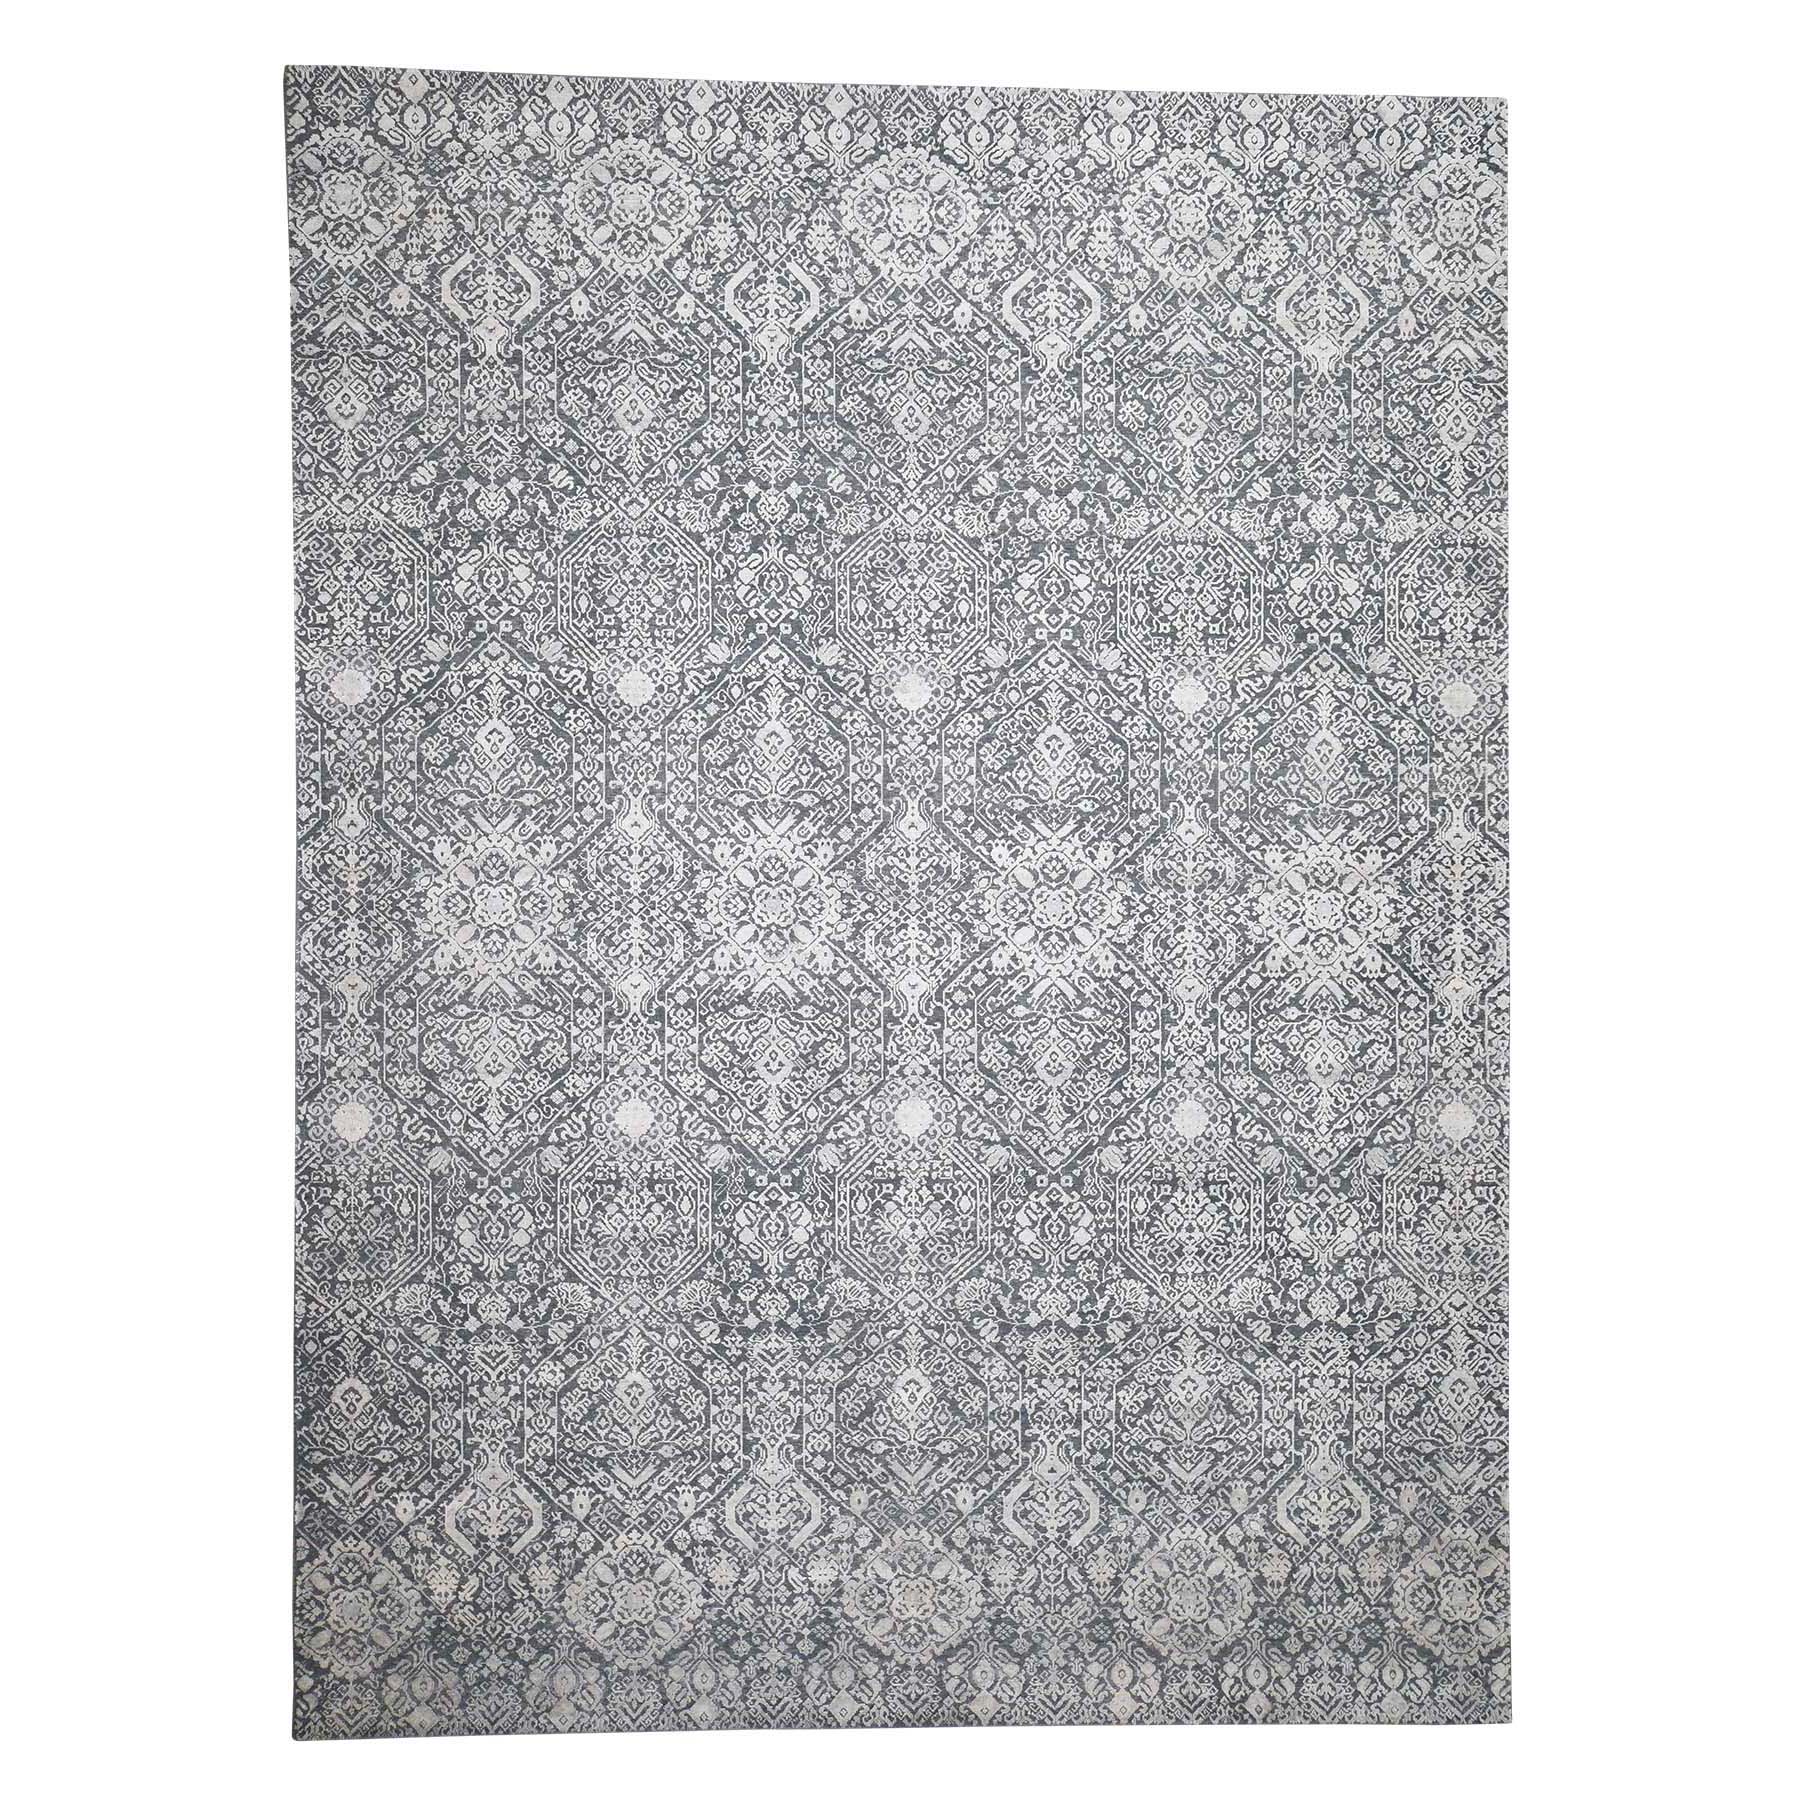 9'x12'2" Tone On Tone Silk With Textured Wool Transitional Hand Woven Oriental Rug 